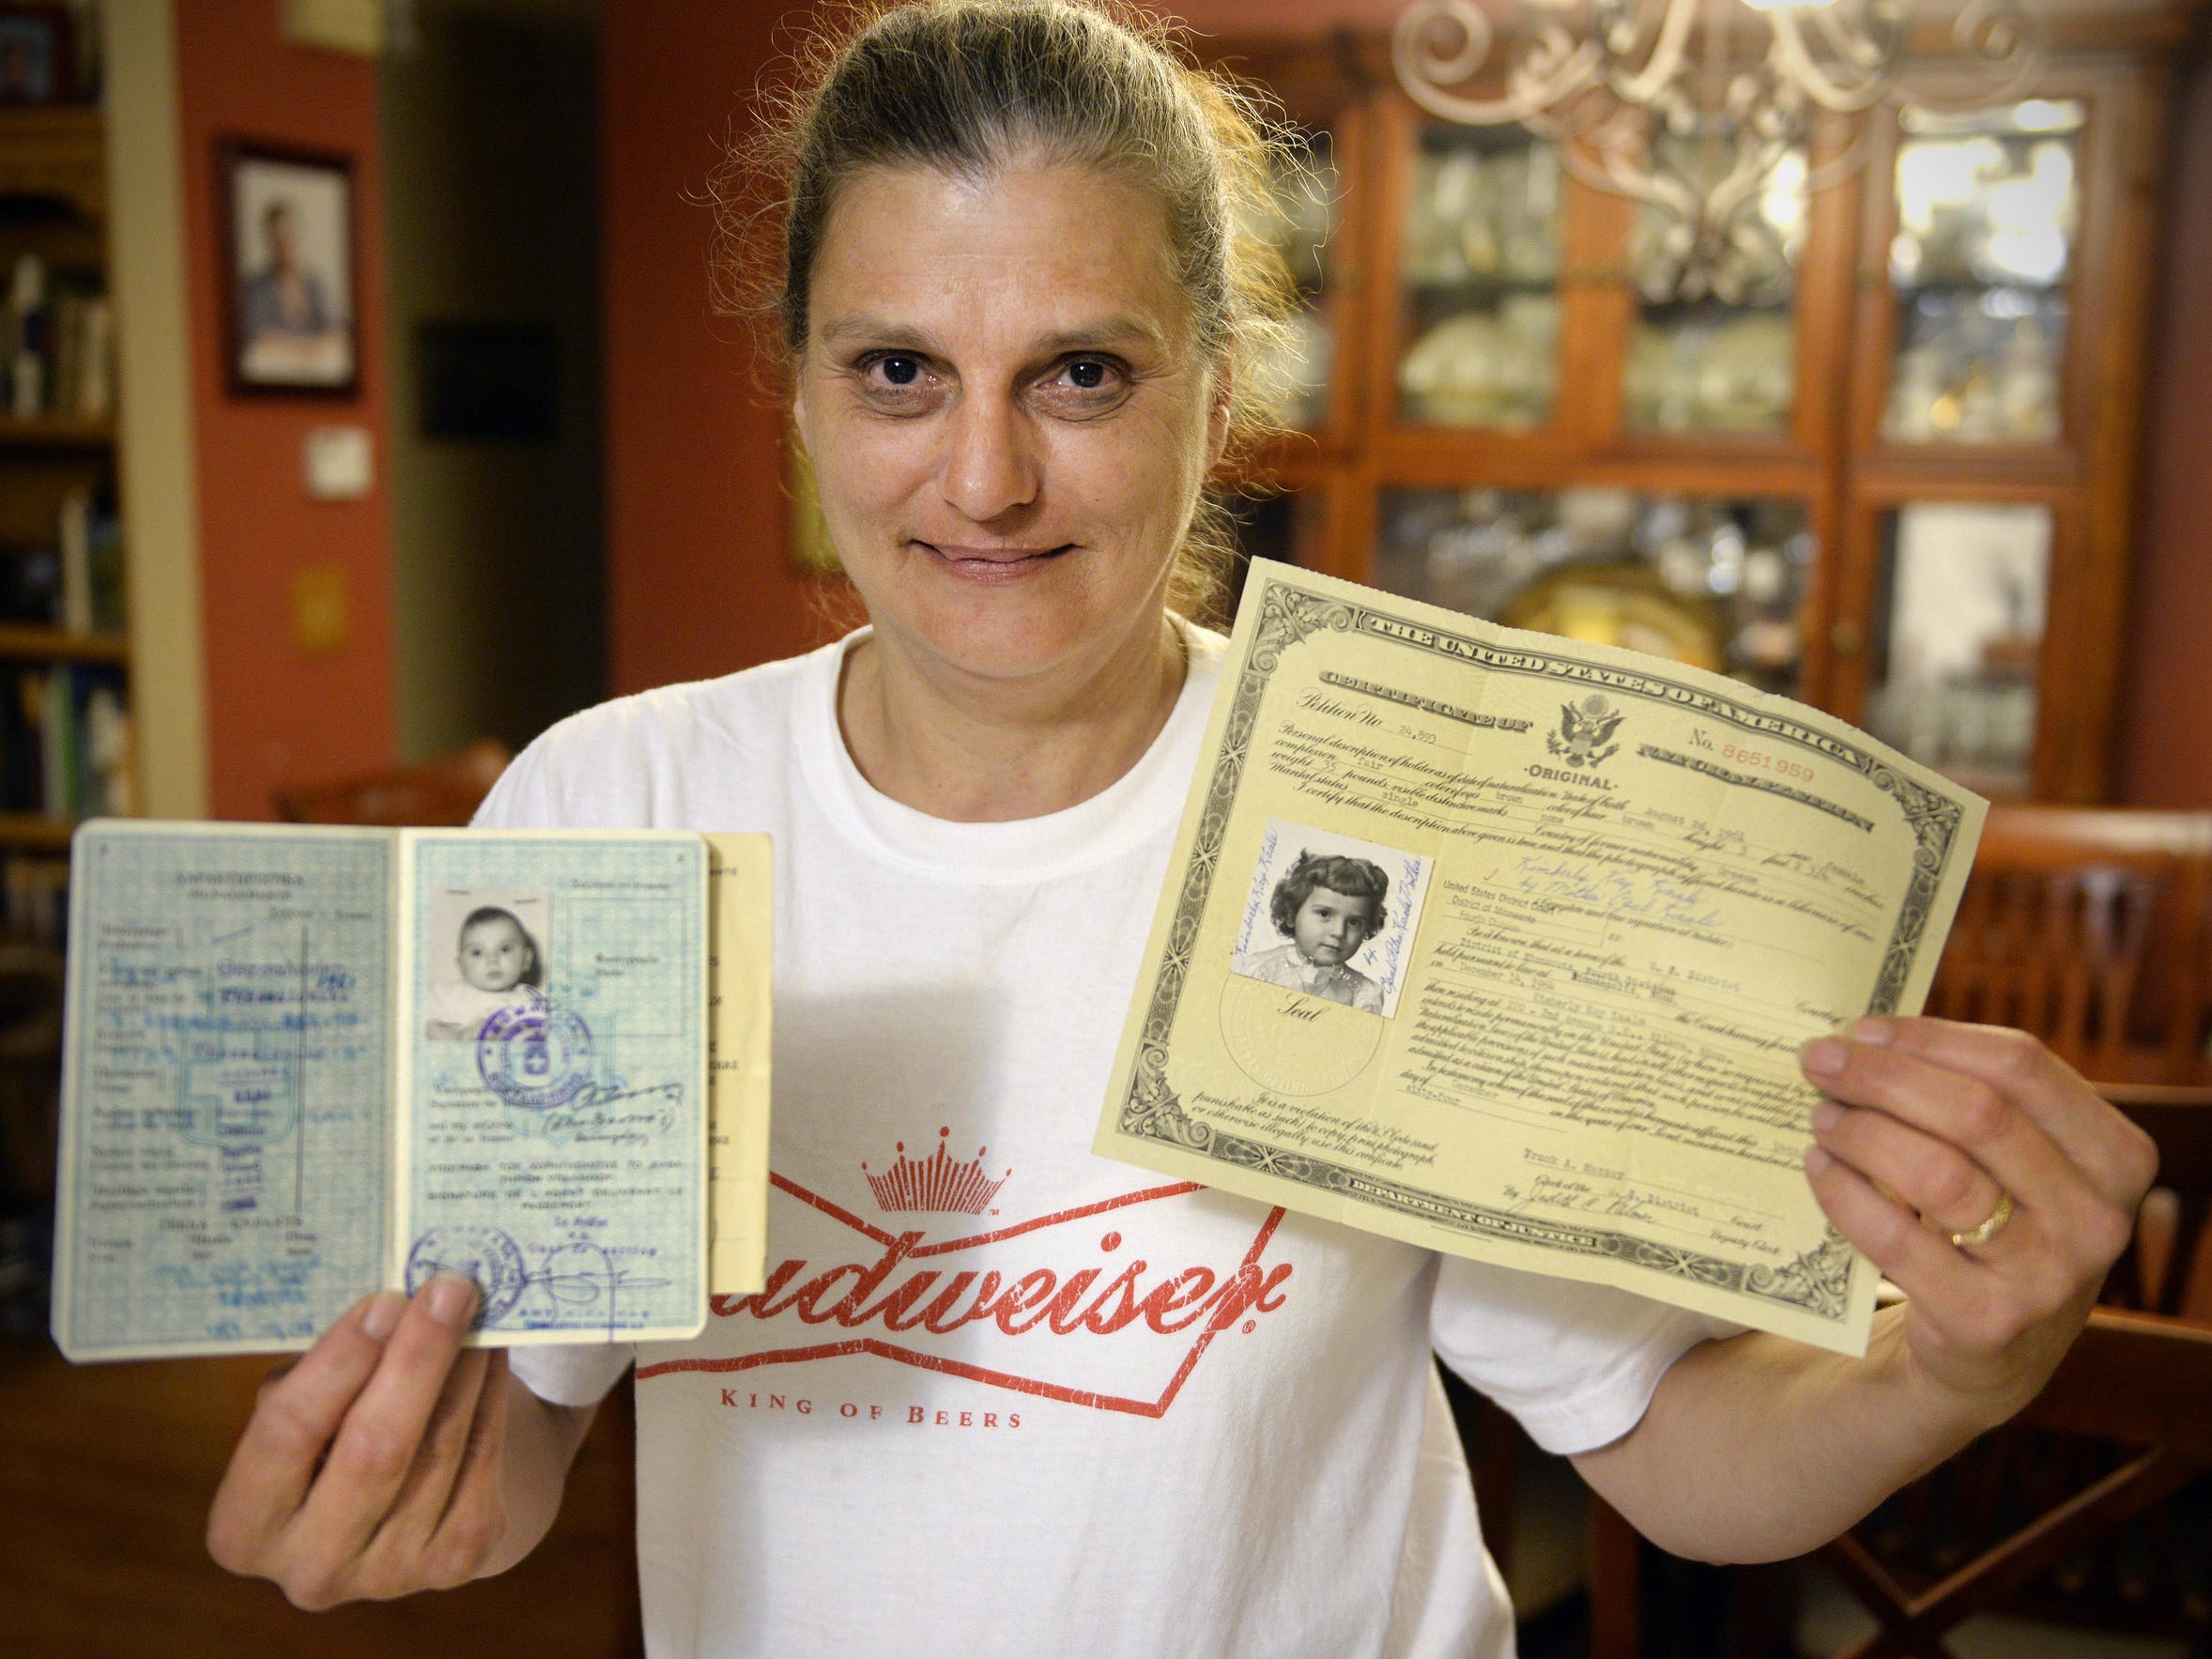 Kim Kruse has the documents adorned with her photo